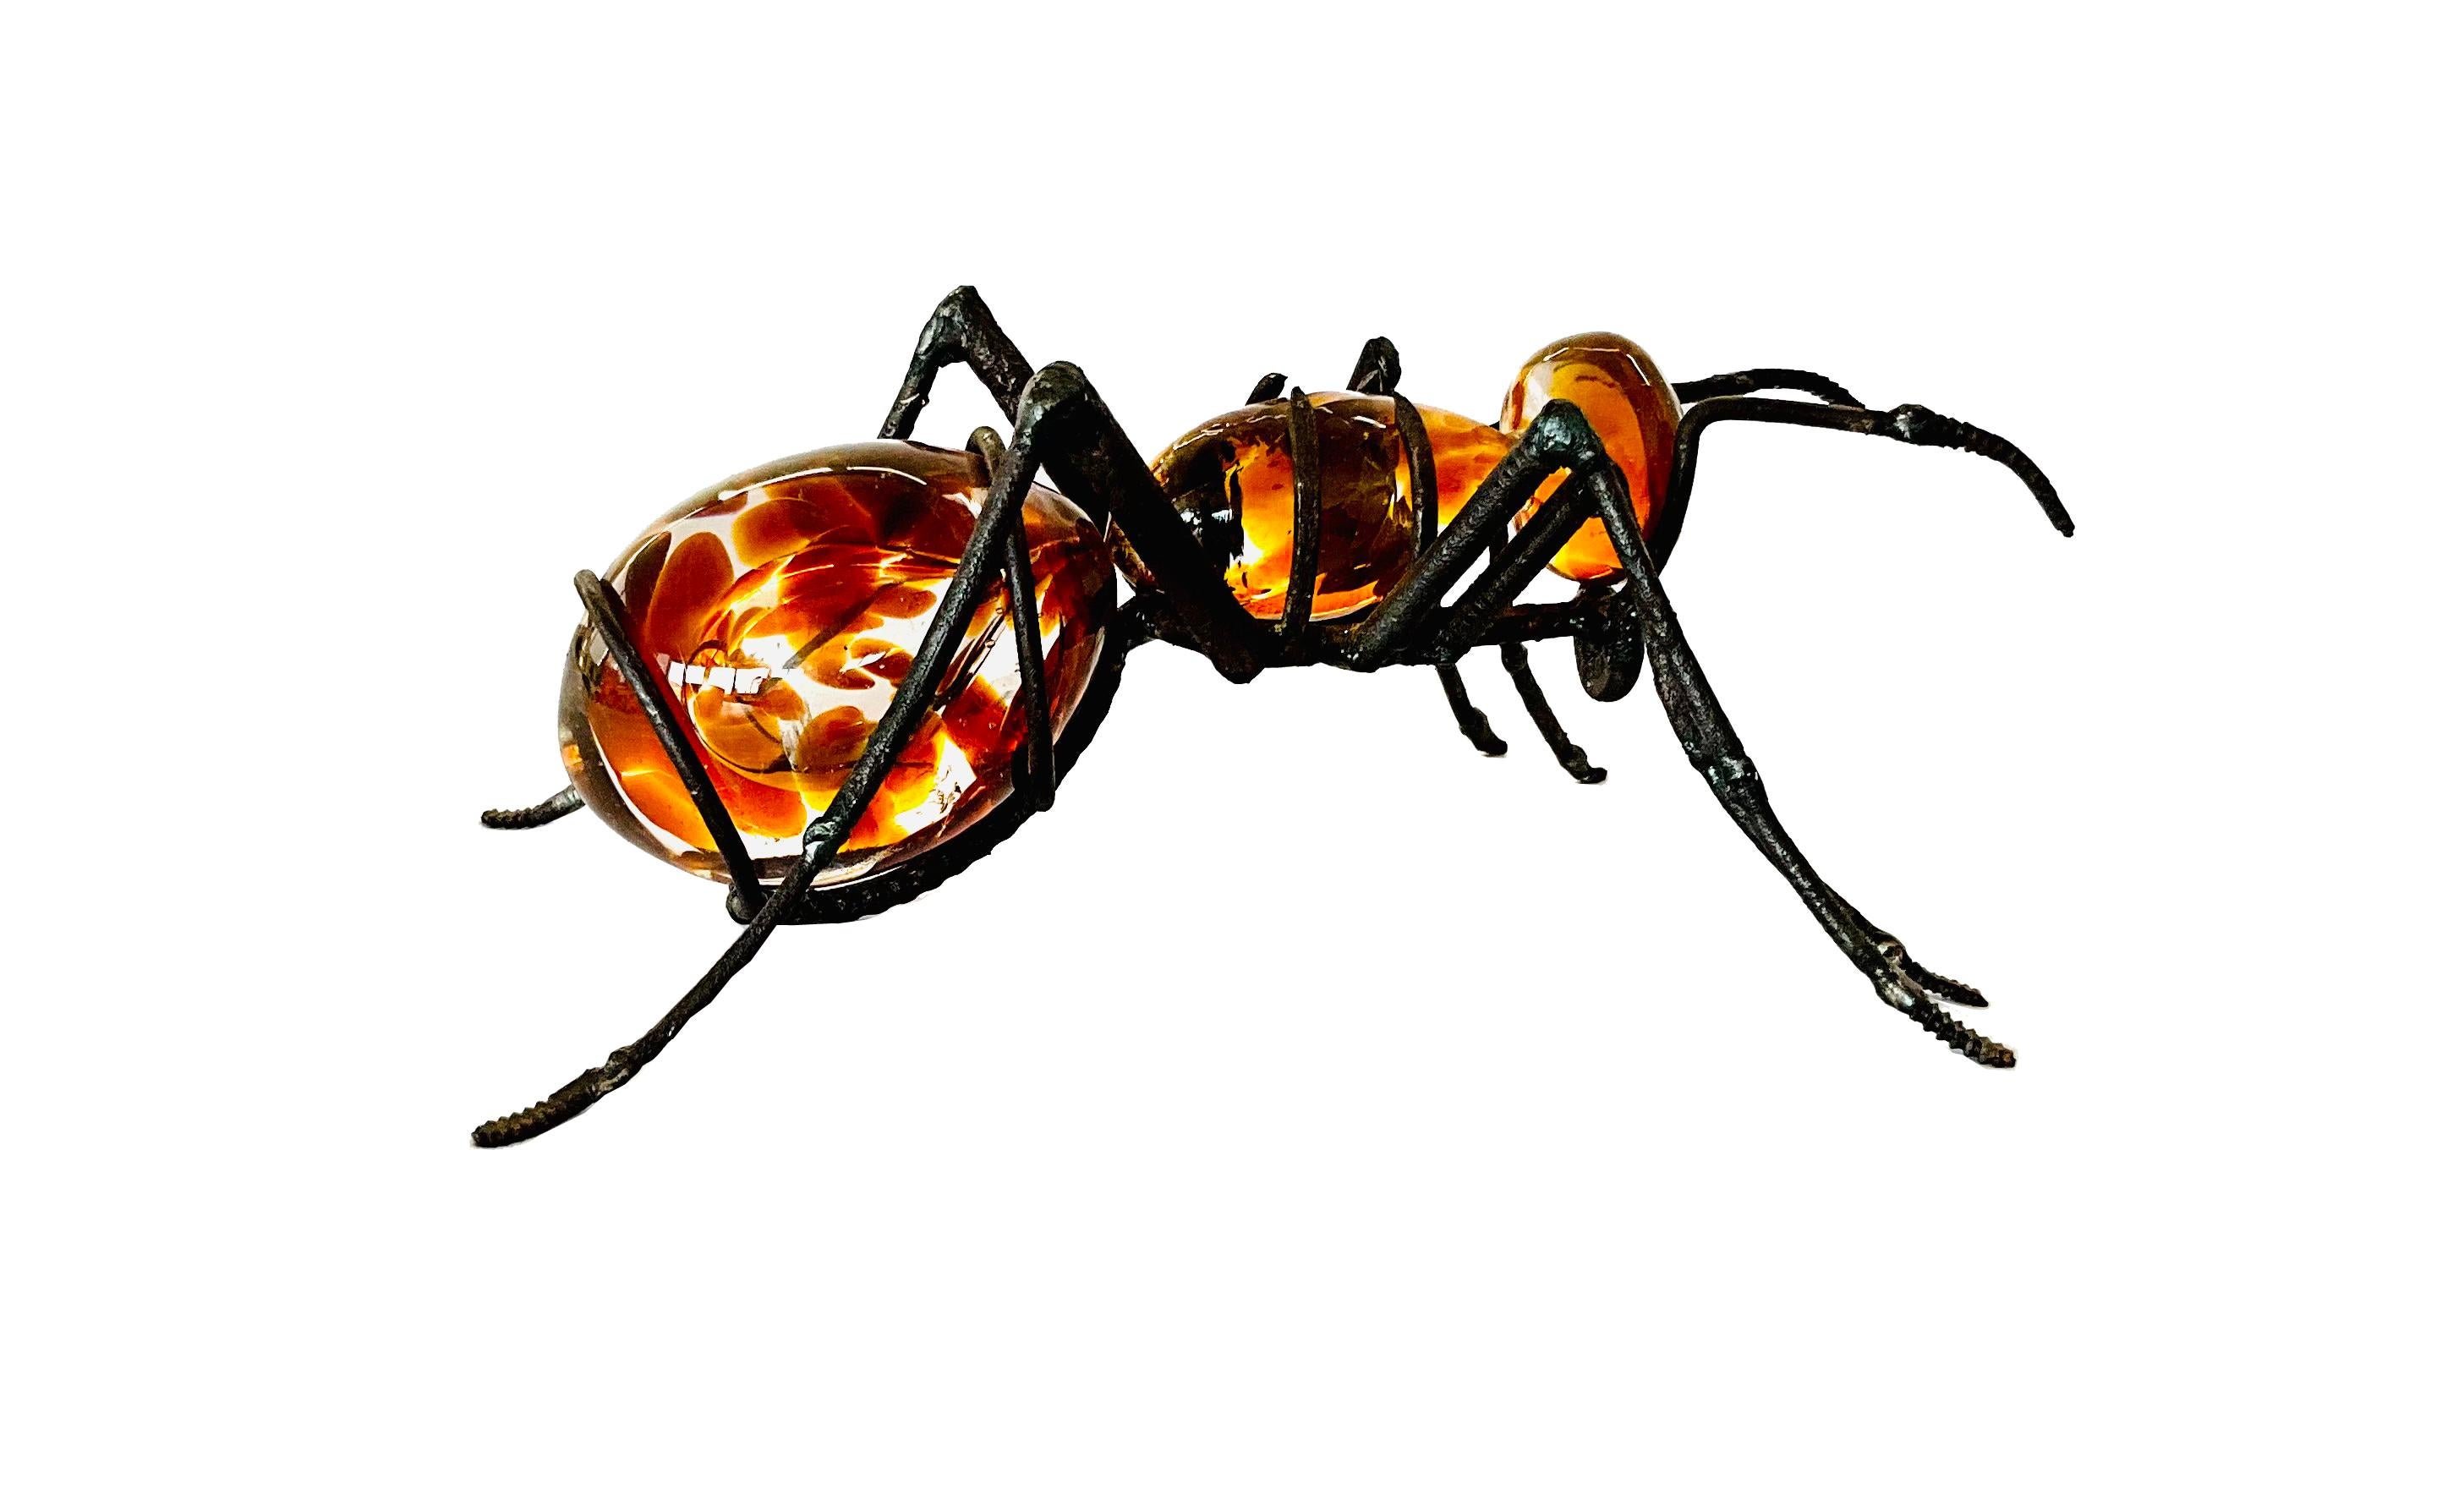 Hand-Blown Glass Ant, Recycled Steel and Dark Brown Crystal Parts  - Contemporary Sculpture by Marcos Romero Gallardo